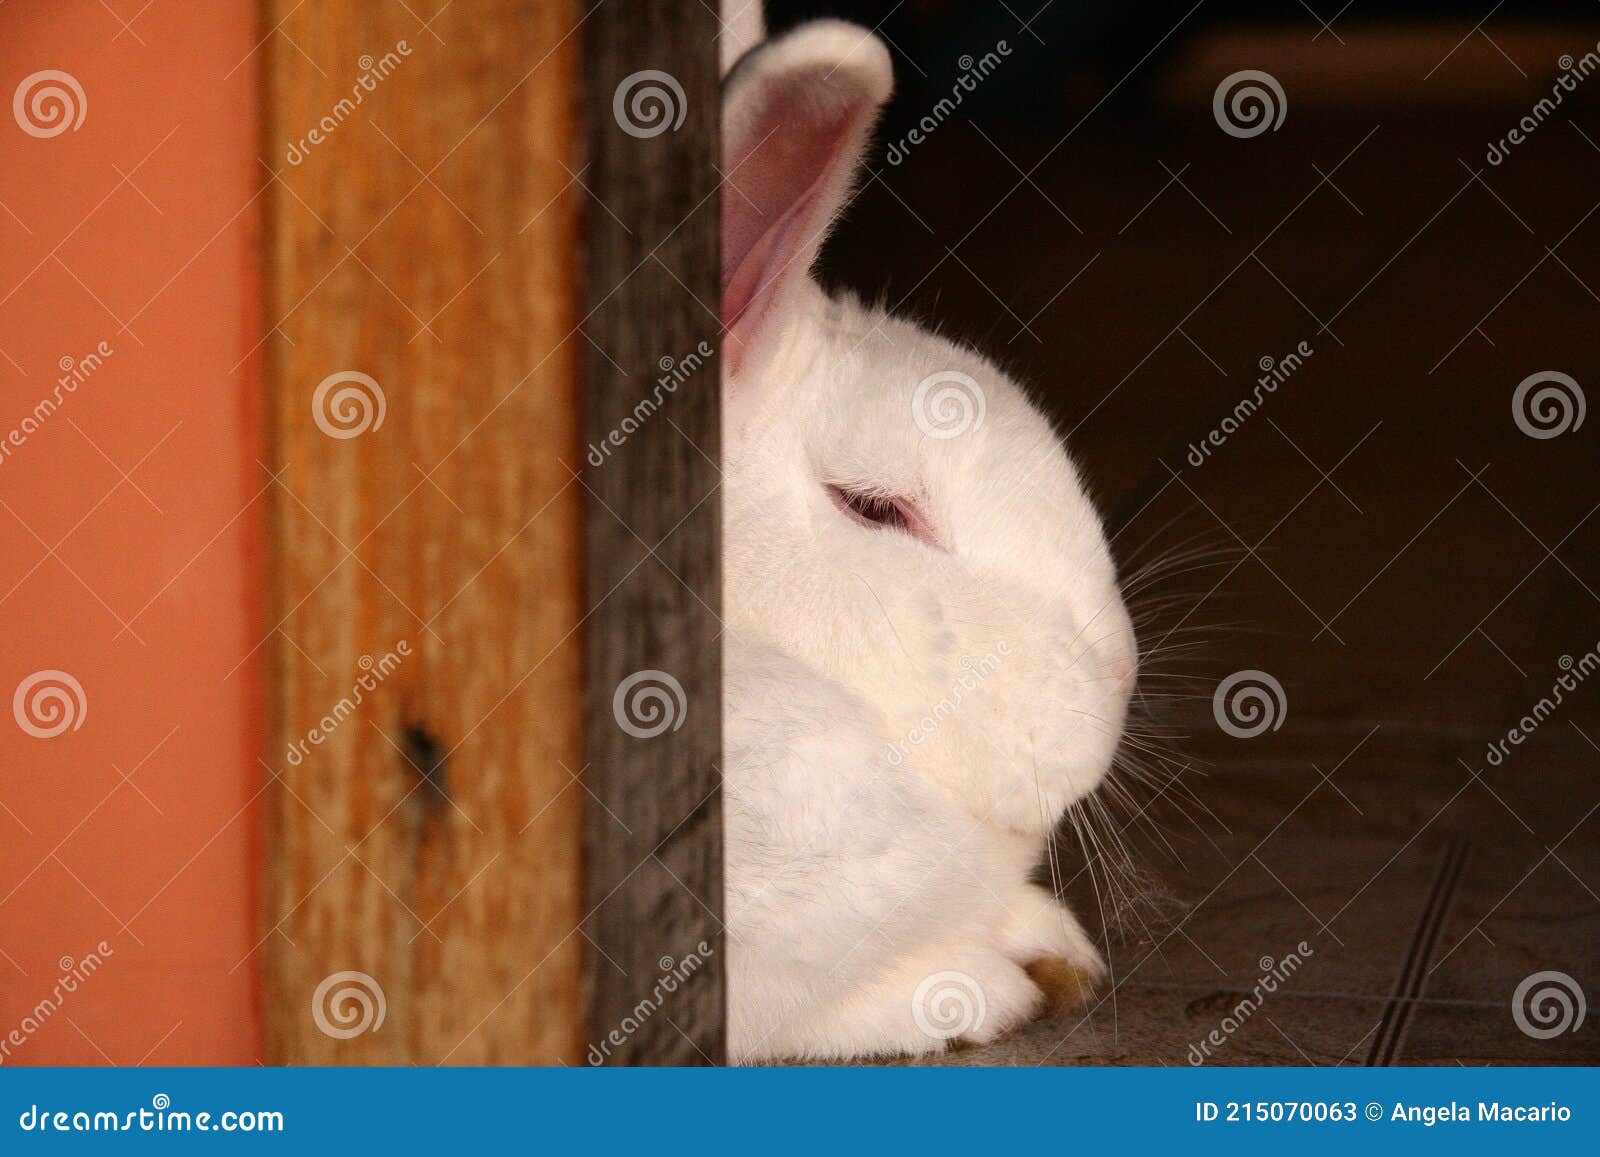 face of white furry rabbit lying behind the door.